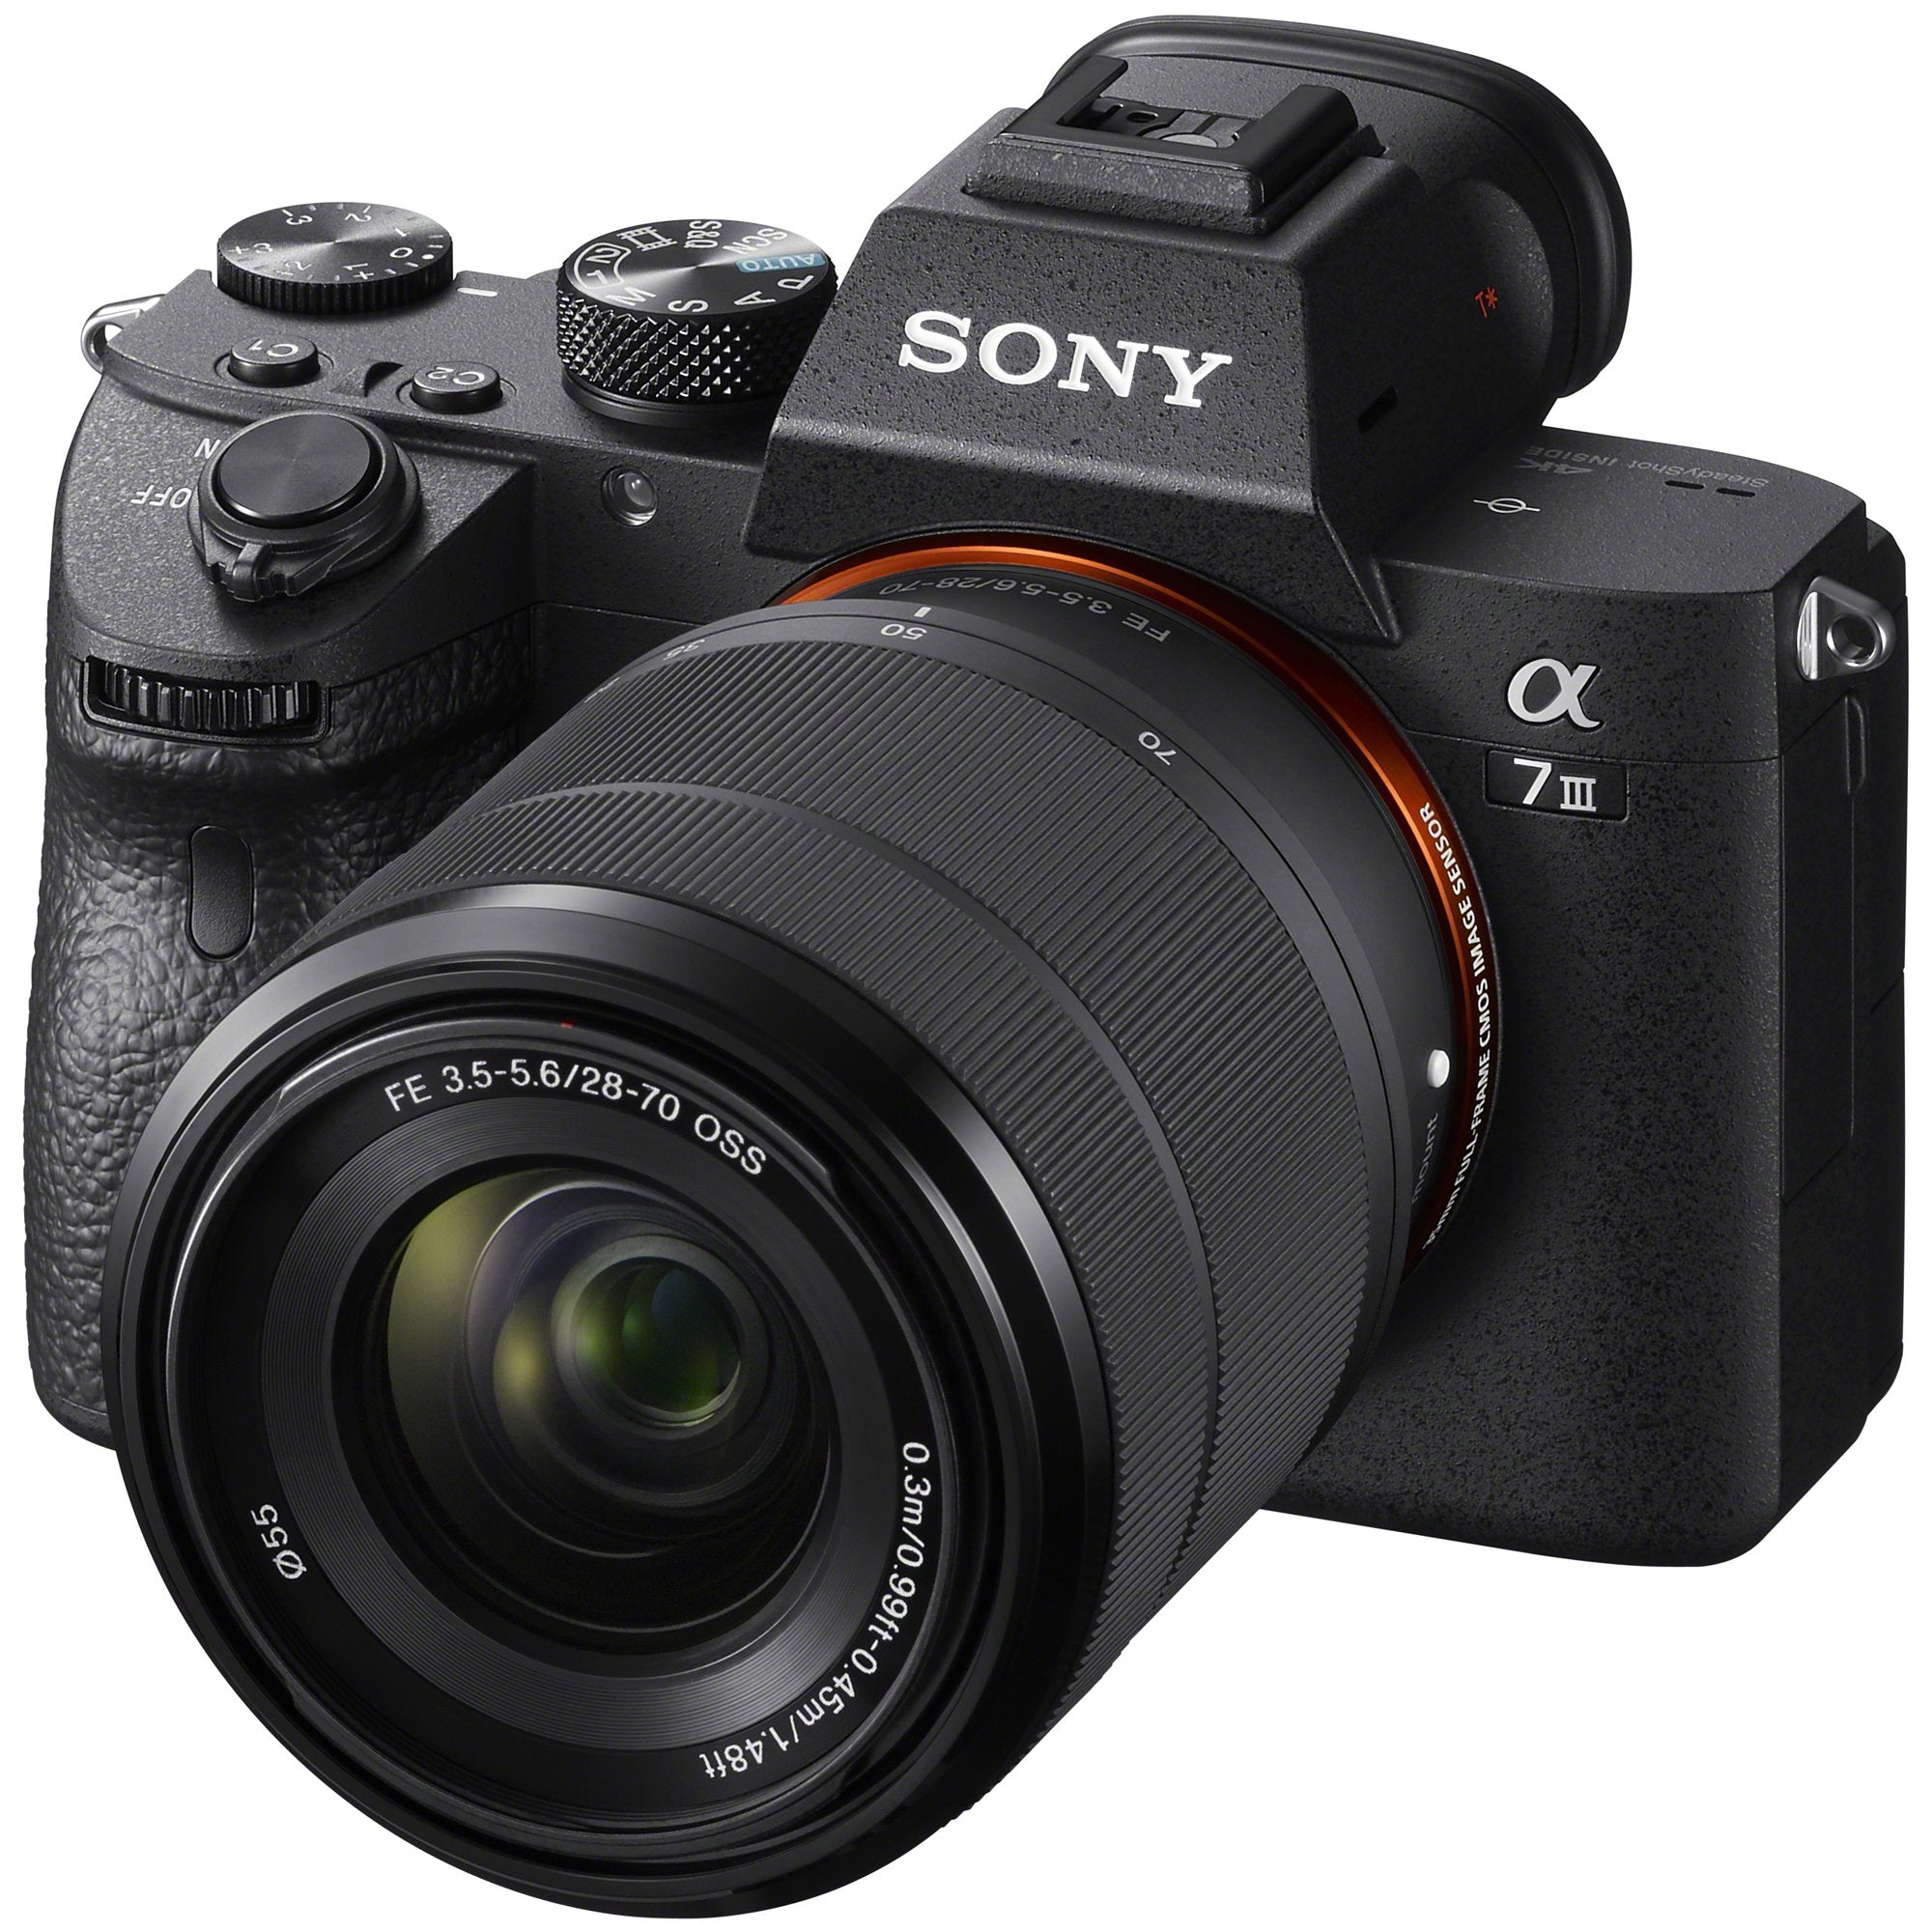 Sony a7 III Full-Frame Mirrorless Interchangeable-Lens Camera with 28-70mm Lens